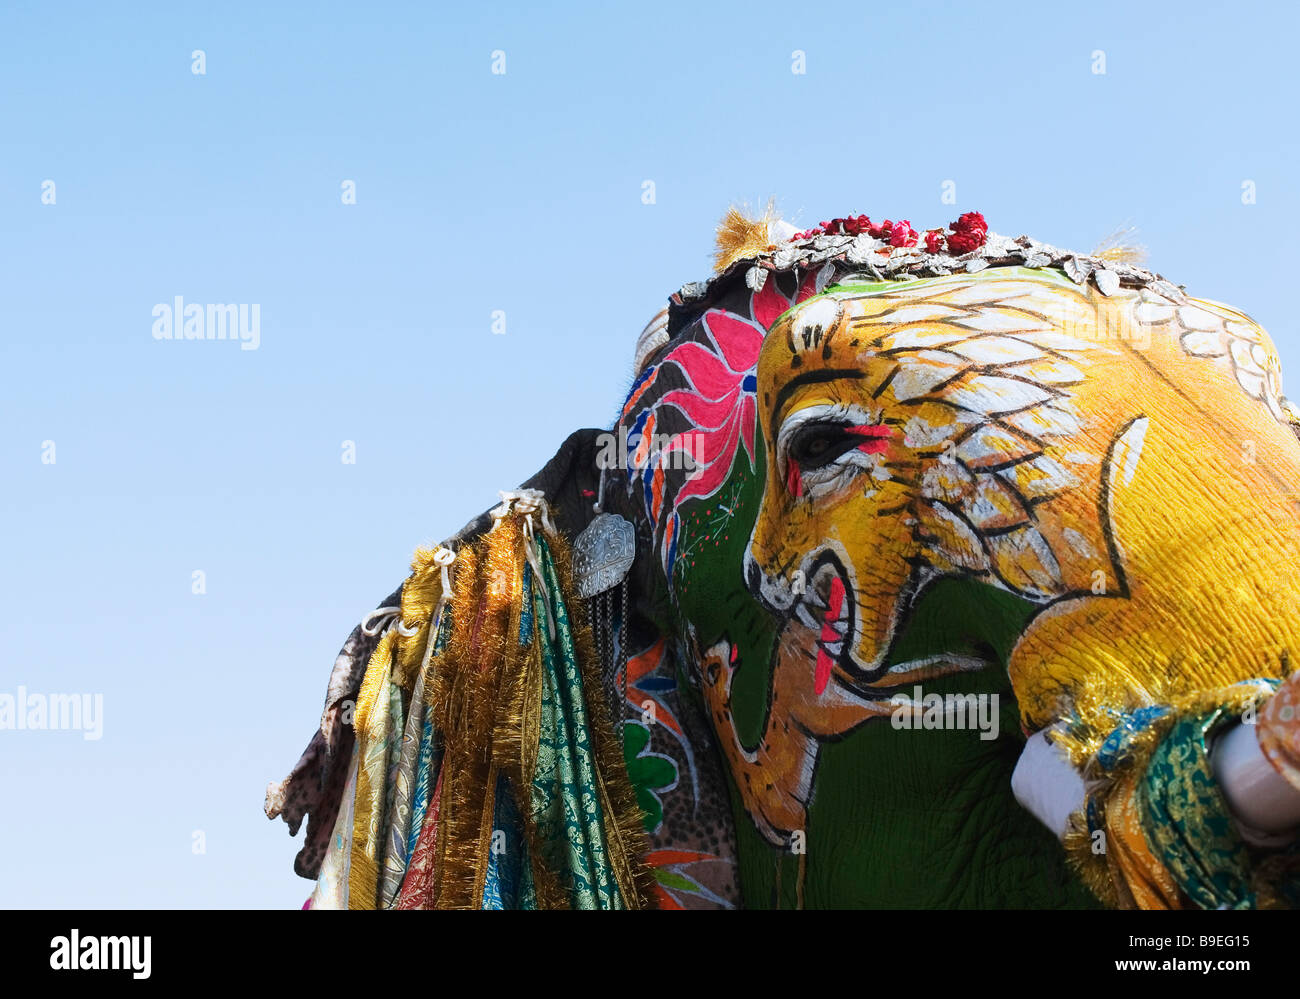 Image of a hunting lion painted on an elephant, Elephant Festival, Jaipur, Rajasthan, India Stock Photo